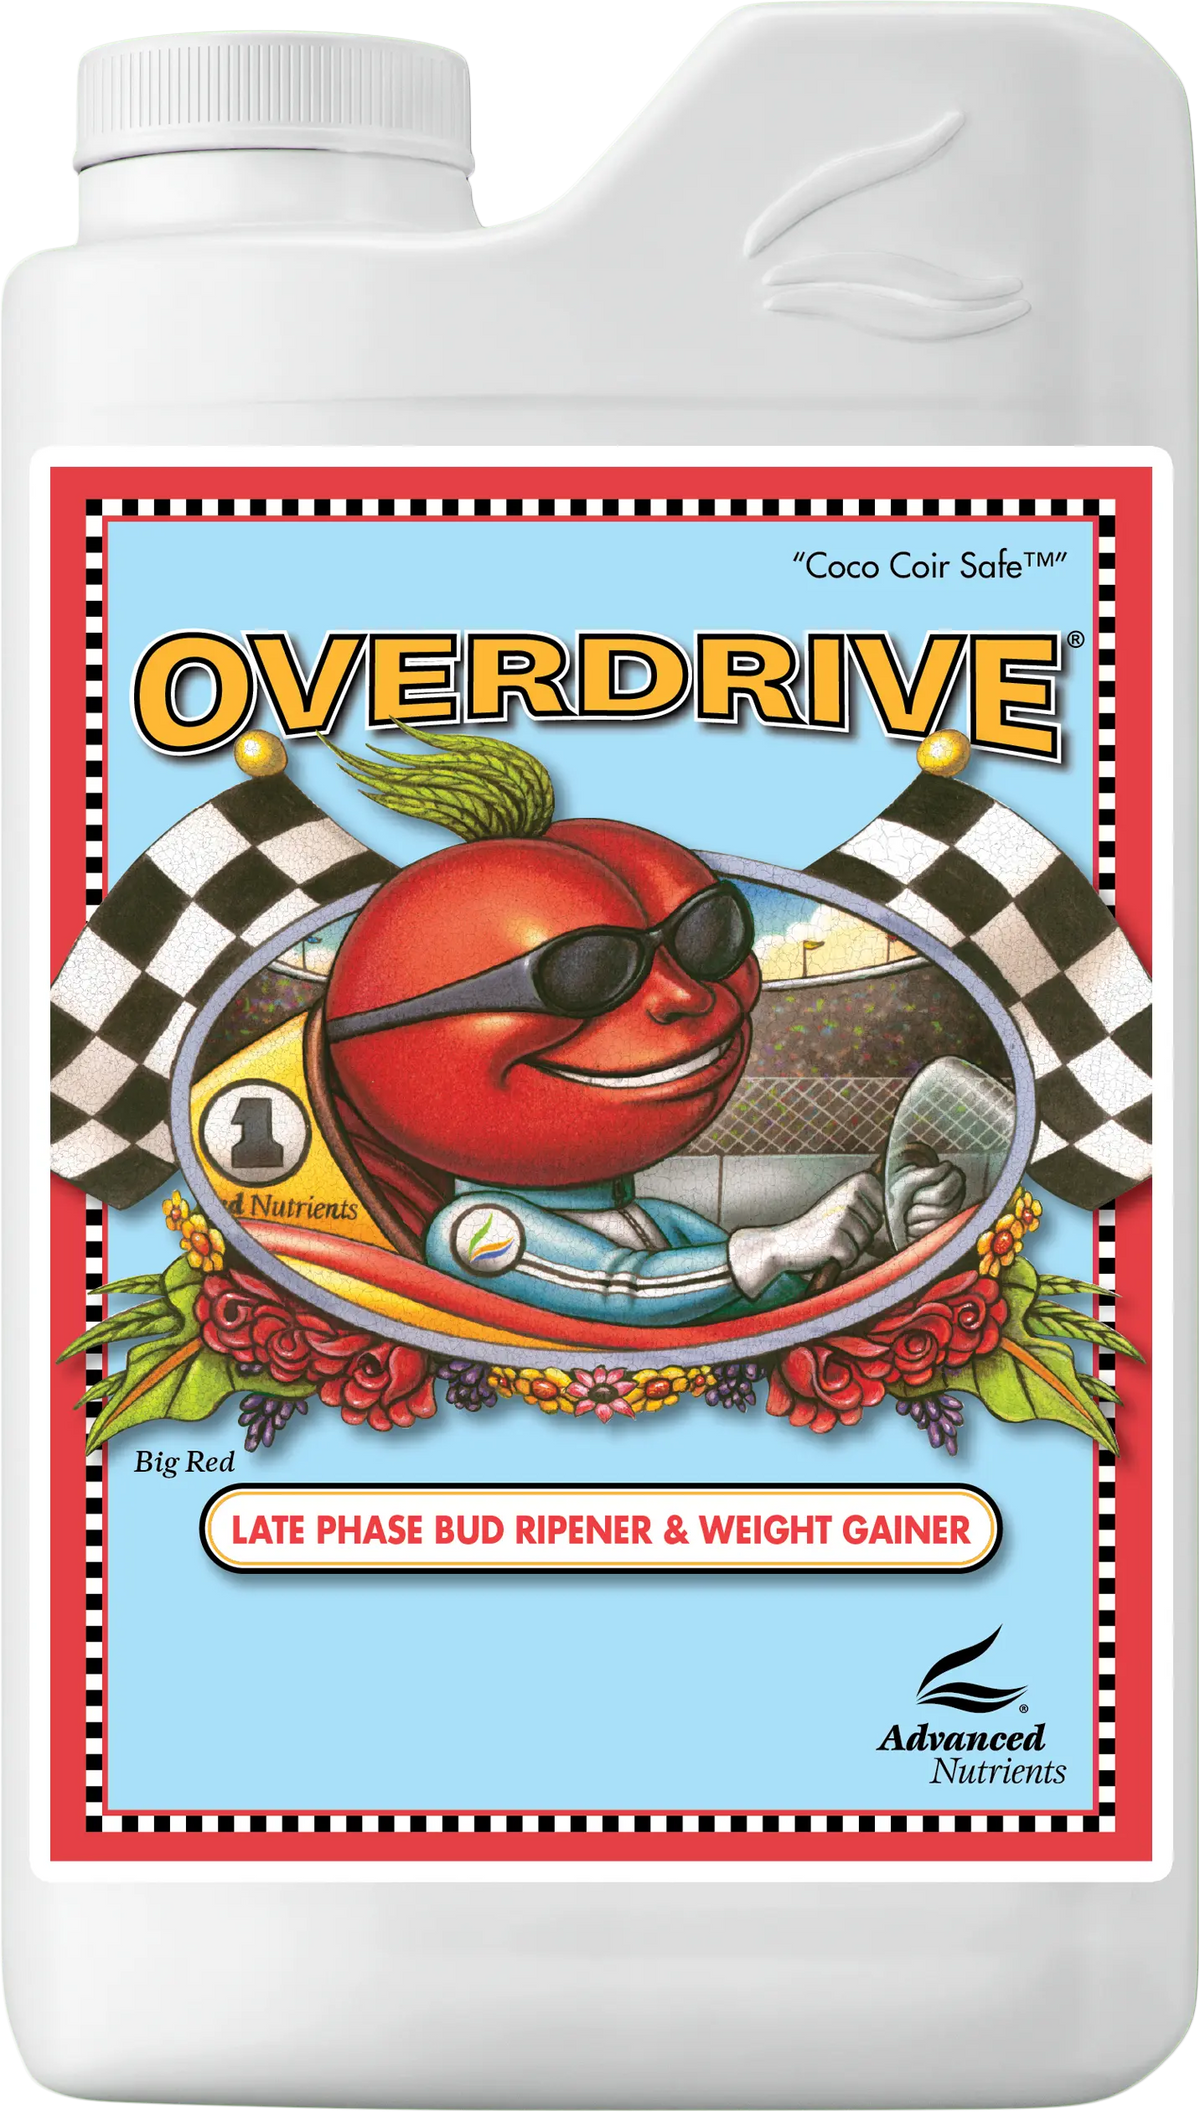 Advanced Nutrients Overdrive® Advanced Nutrients